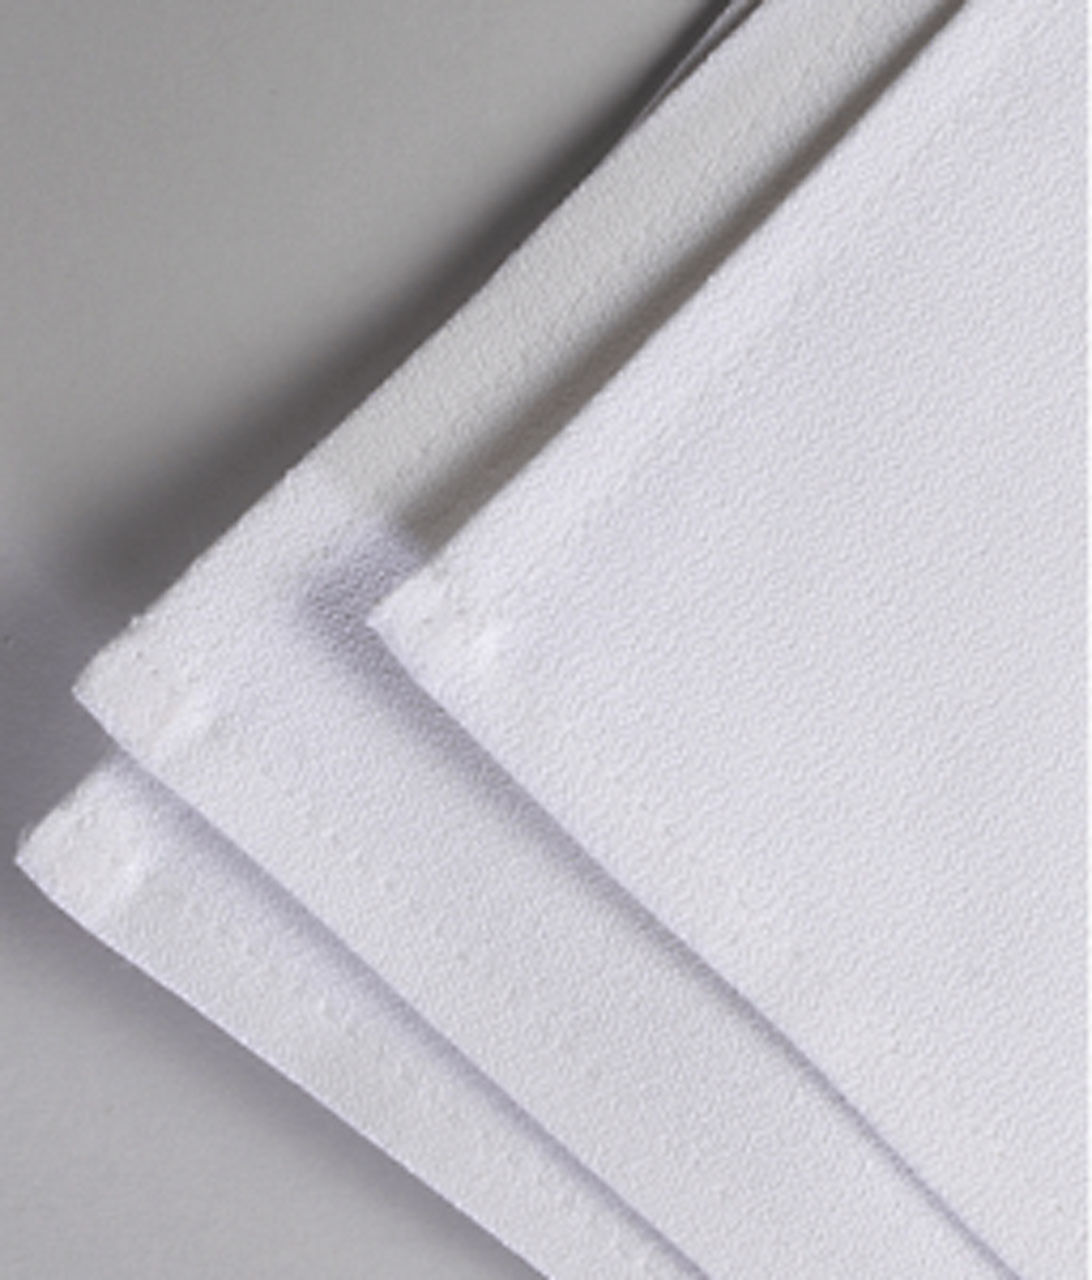 What is the durability level of the Cotton Momie Square Table Linens?